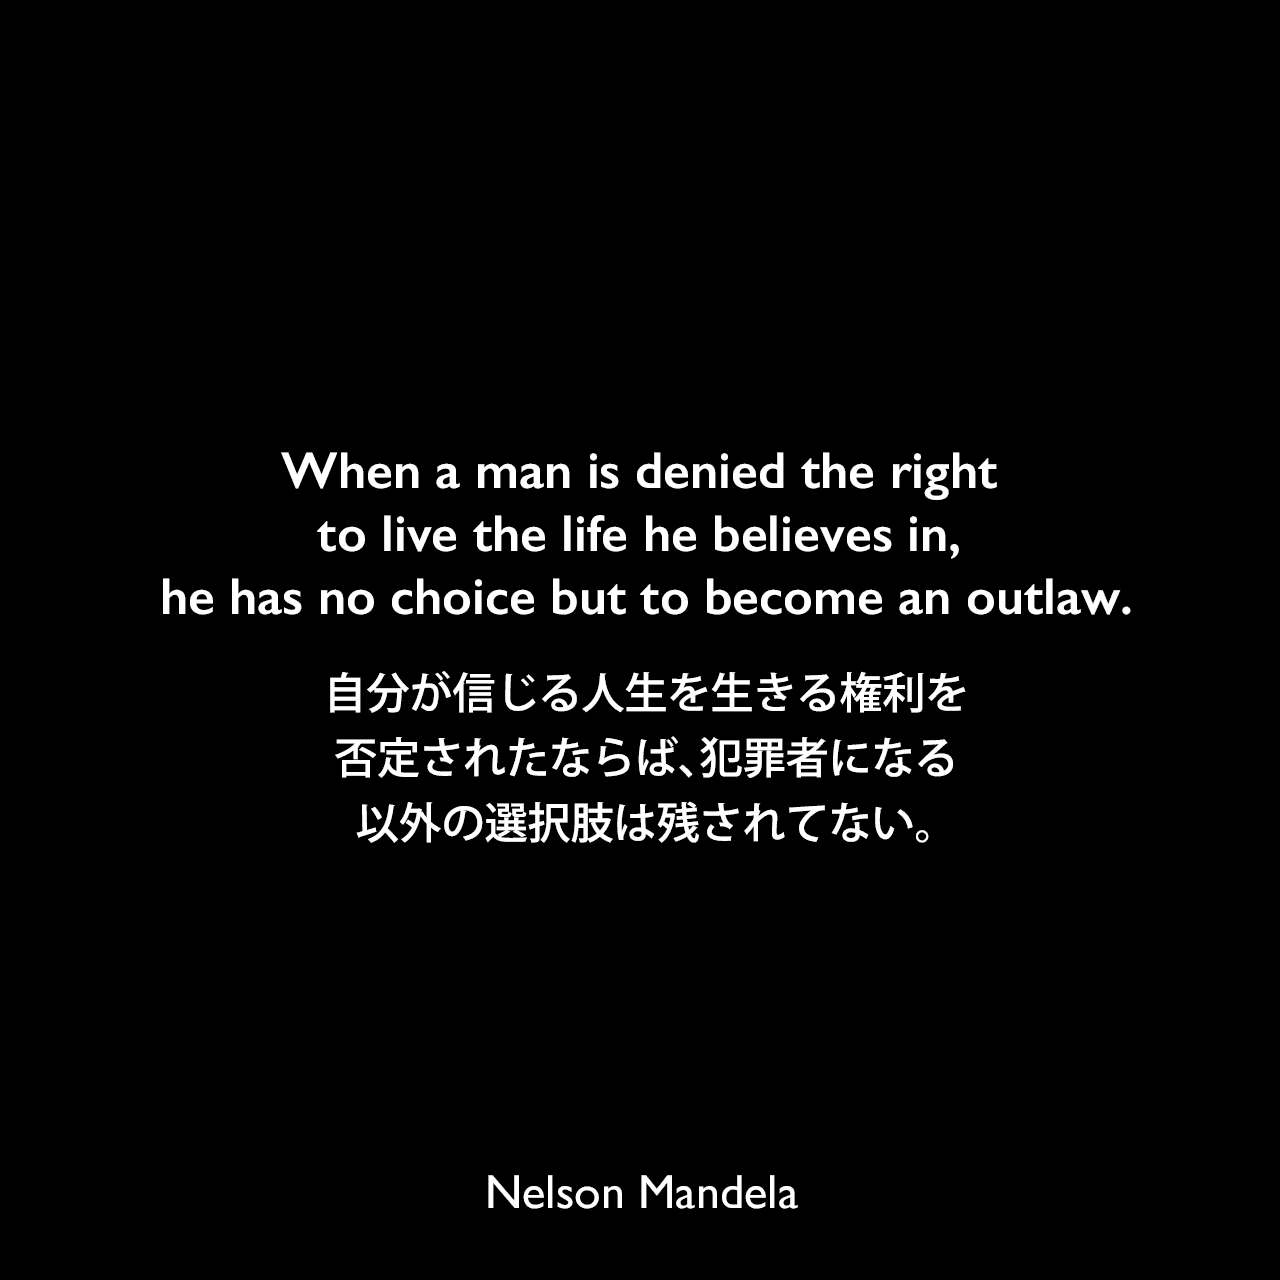 When a man is denied the right to live the life he believes in, he has no choice but to become an outlaw.自分が信じる人生を生きる権利を否定されたならば、犯罪者になる以外の選択肢は残されてない。- ネルソン・マンデラによる本「自由への長い道 ネルソン・マンデラ自伝」よりNelson Mandela